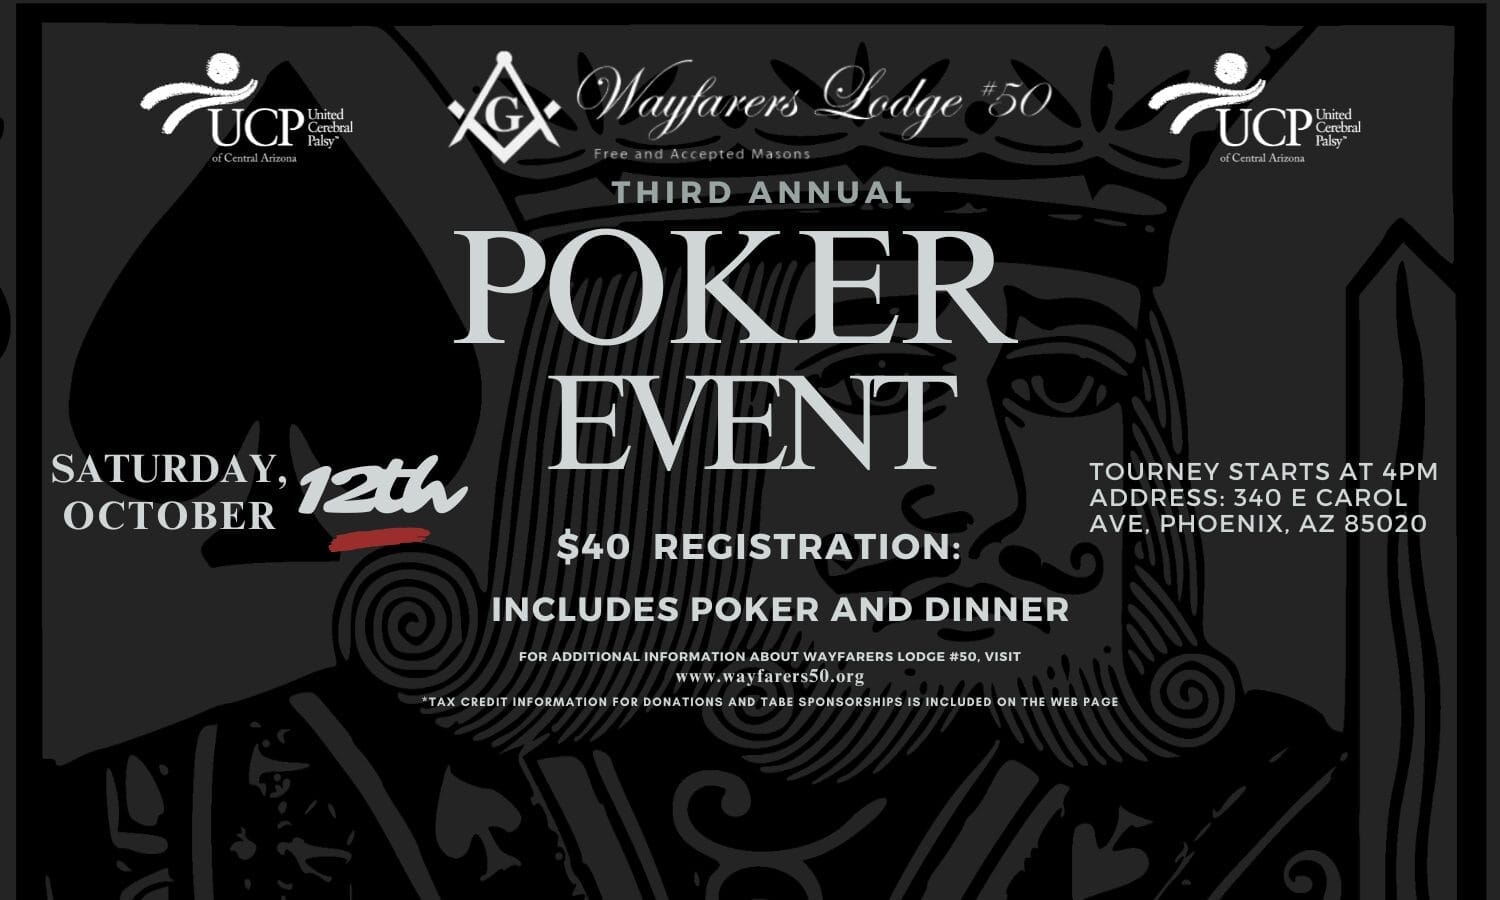 Flyer for the Third Annual Poker Event hosted by Wayfarers Lodge 50 and UCP, supporting those with Cerebral Palsy, on Saturday, October 12. $40 registration includes poker and dinner. Starts at 4 PM, 340 E Carol Ave, Phoenix, AZ 85020.